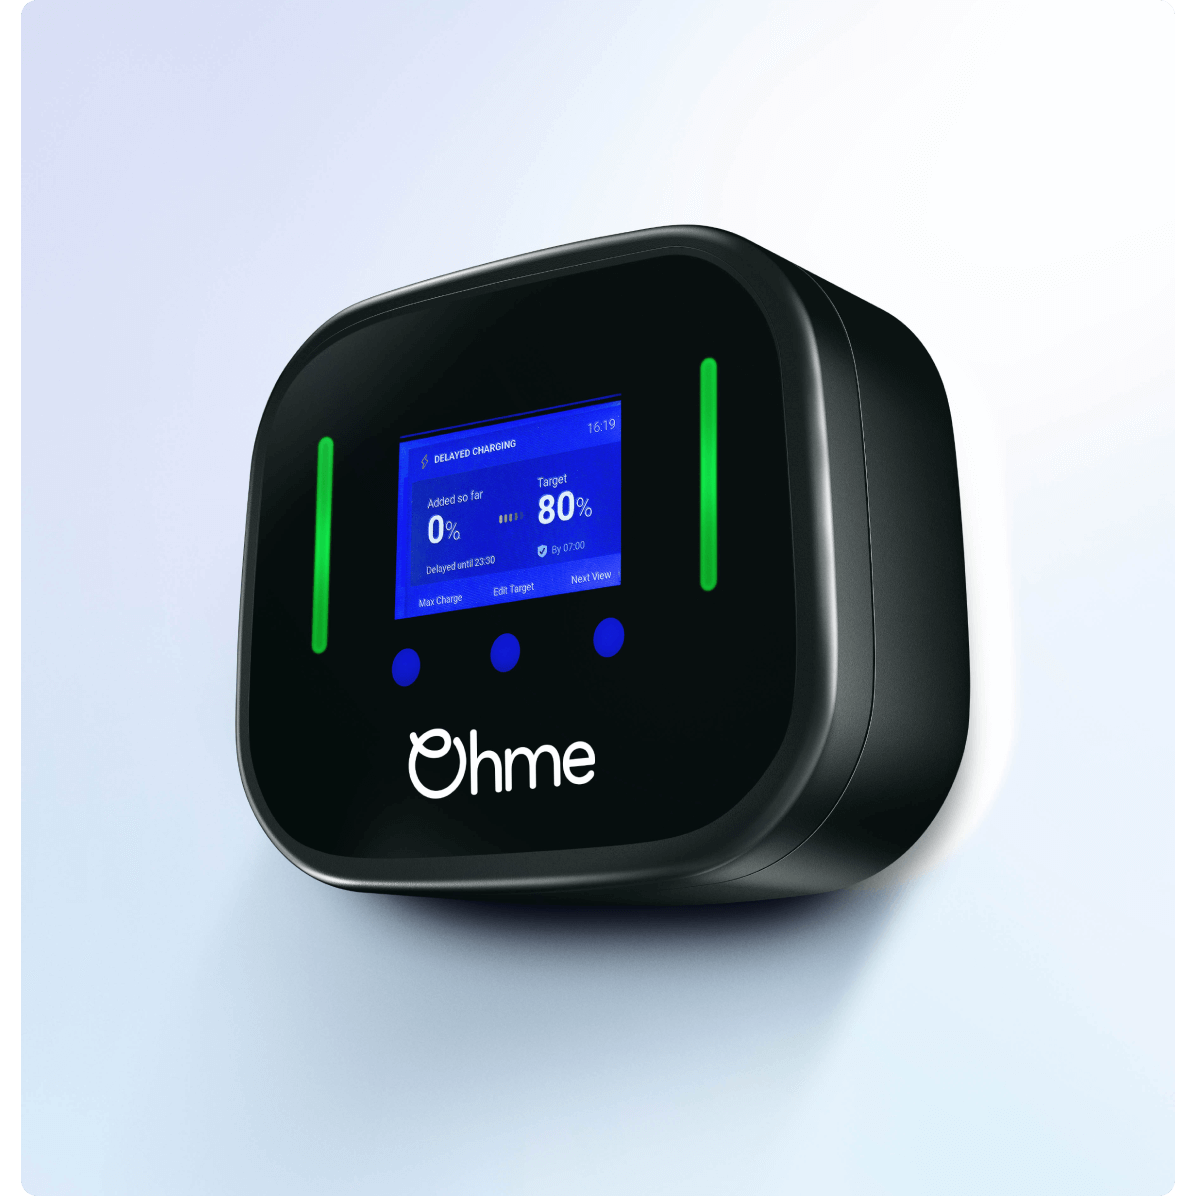 Ohme OHME0002GB28M 7.4kW Home Pro Smart EV Charger with 8 Metre Cable